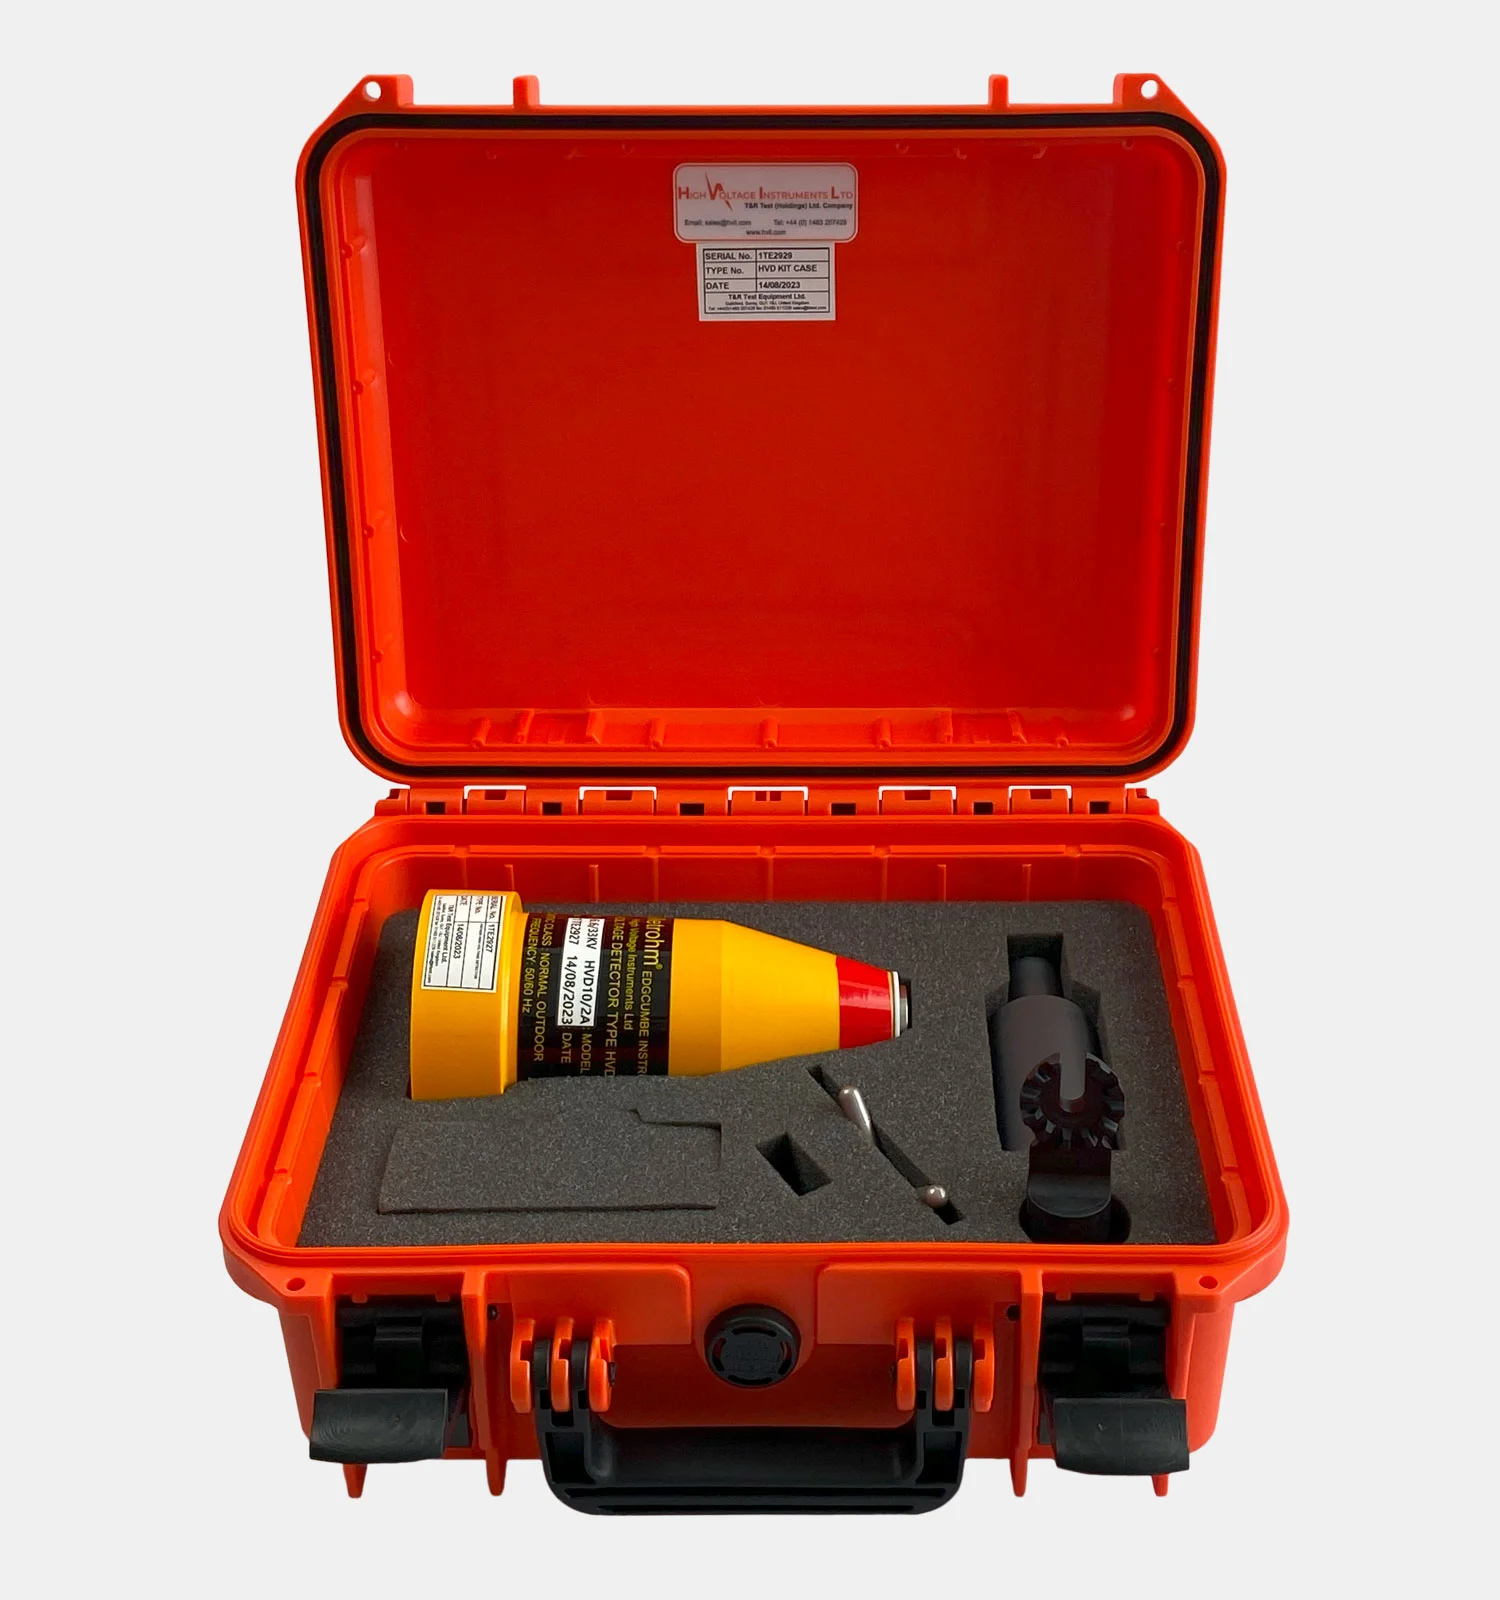 UK Suppliers of HVD10/2A High Voltage Detector Kit